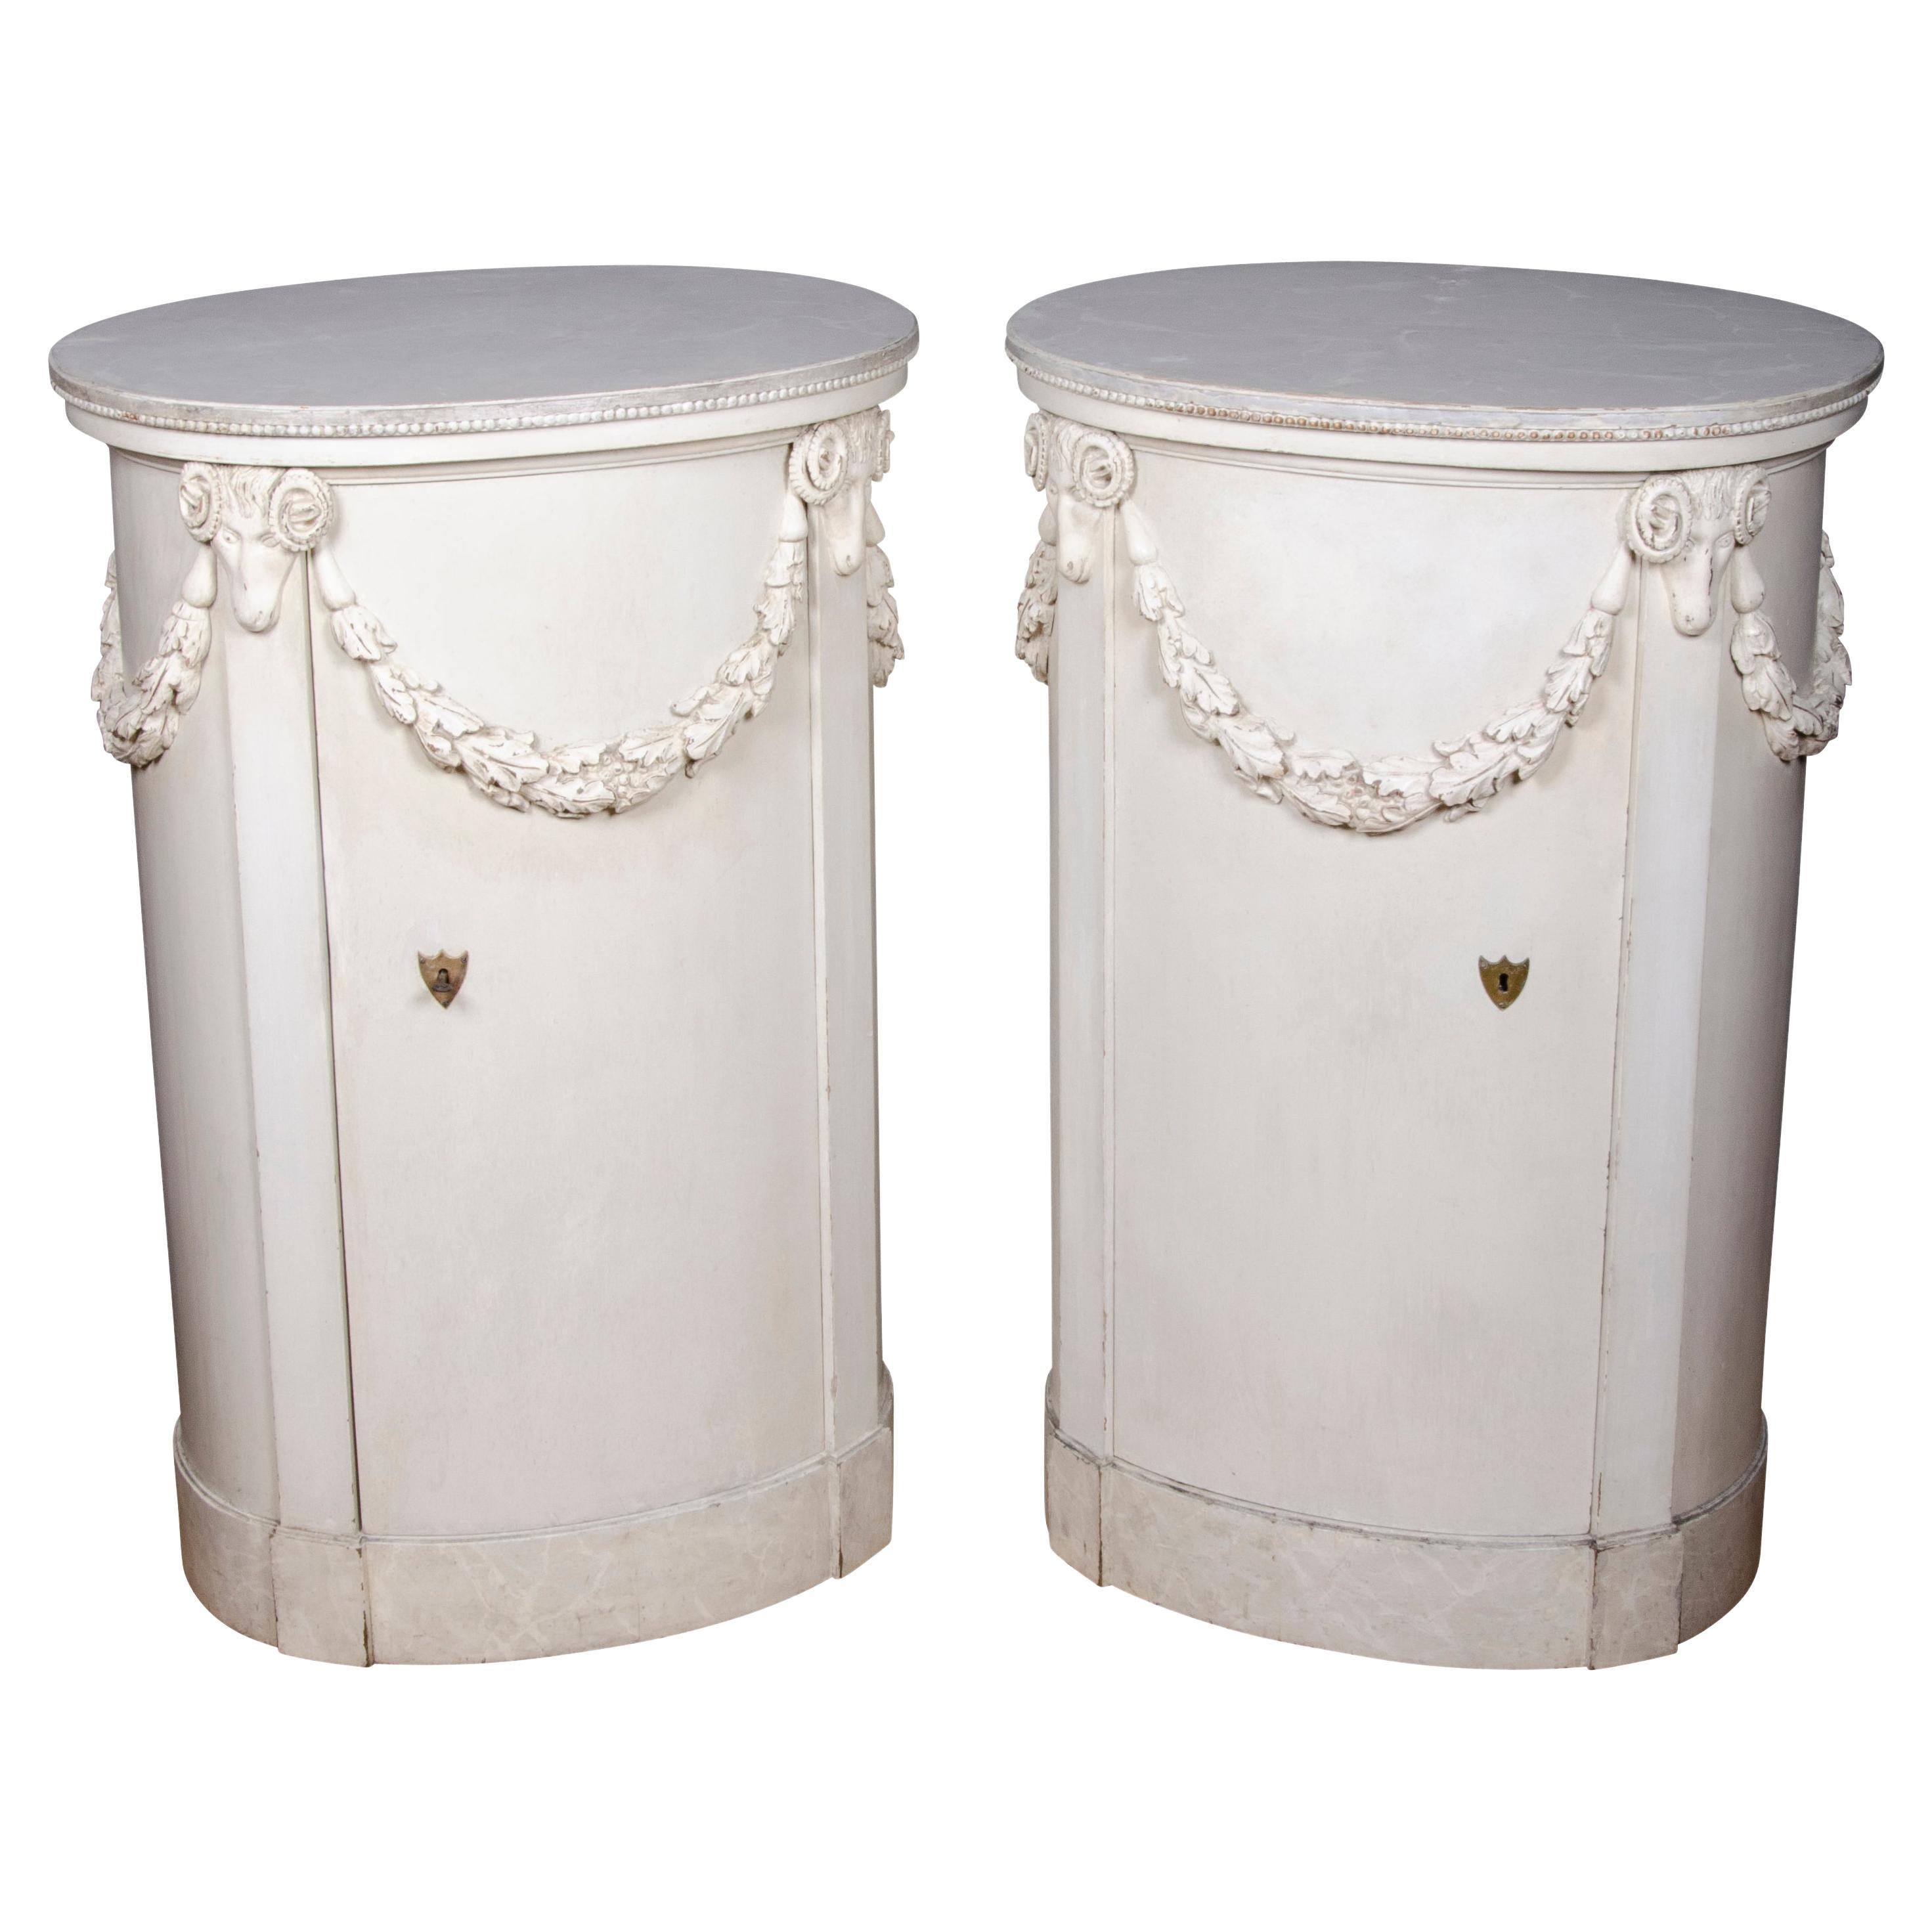 Pair of Neoclassic Style Painted Pedestals